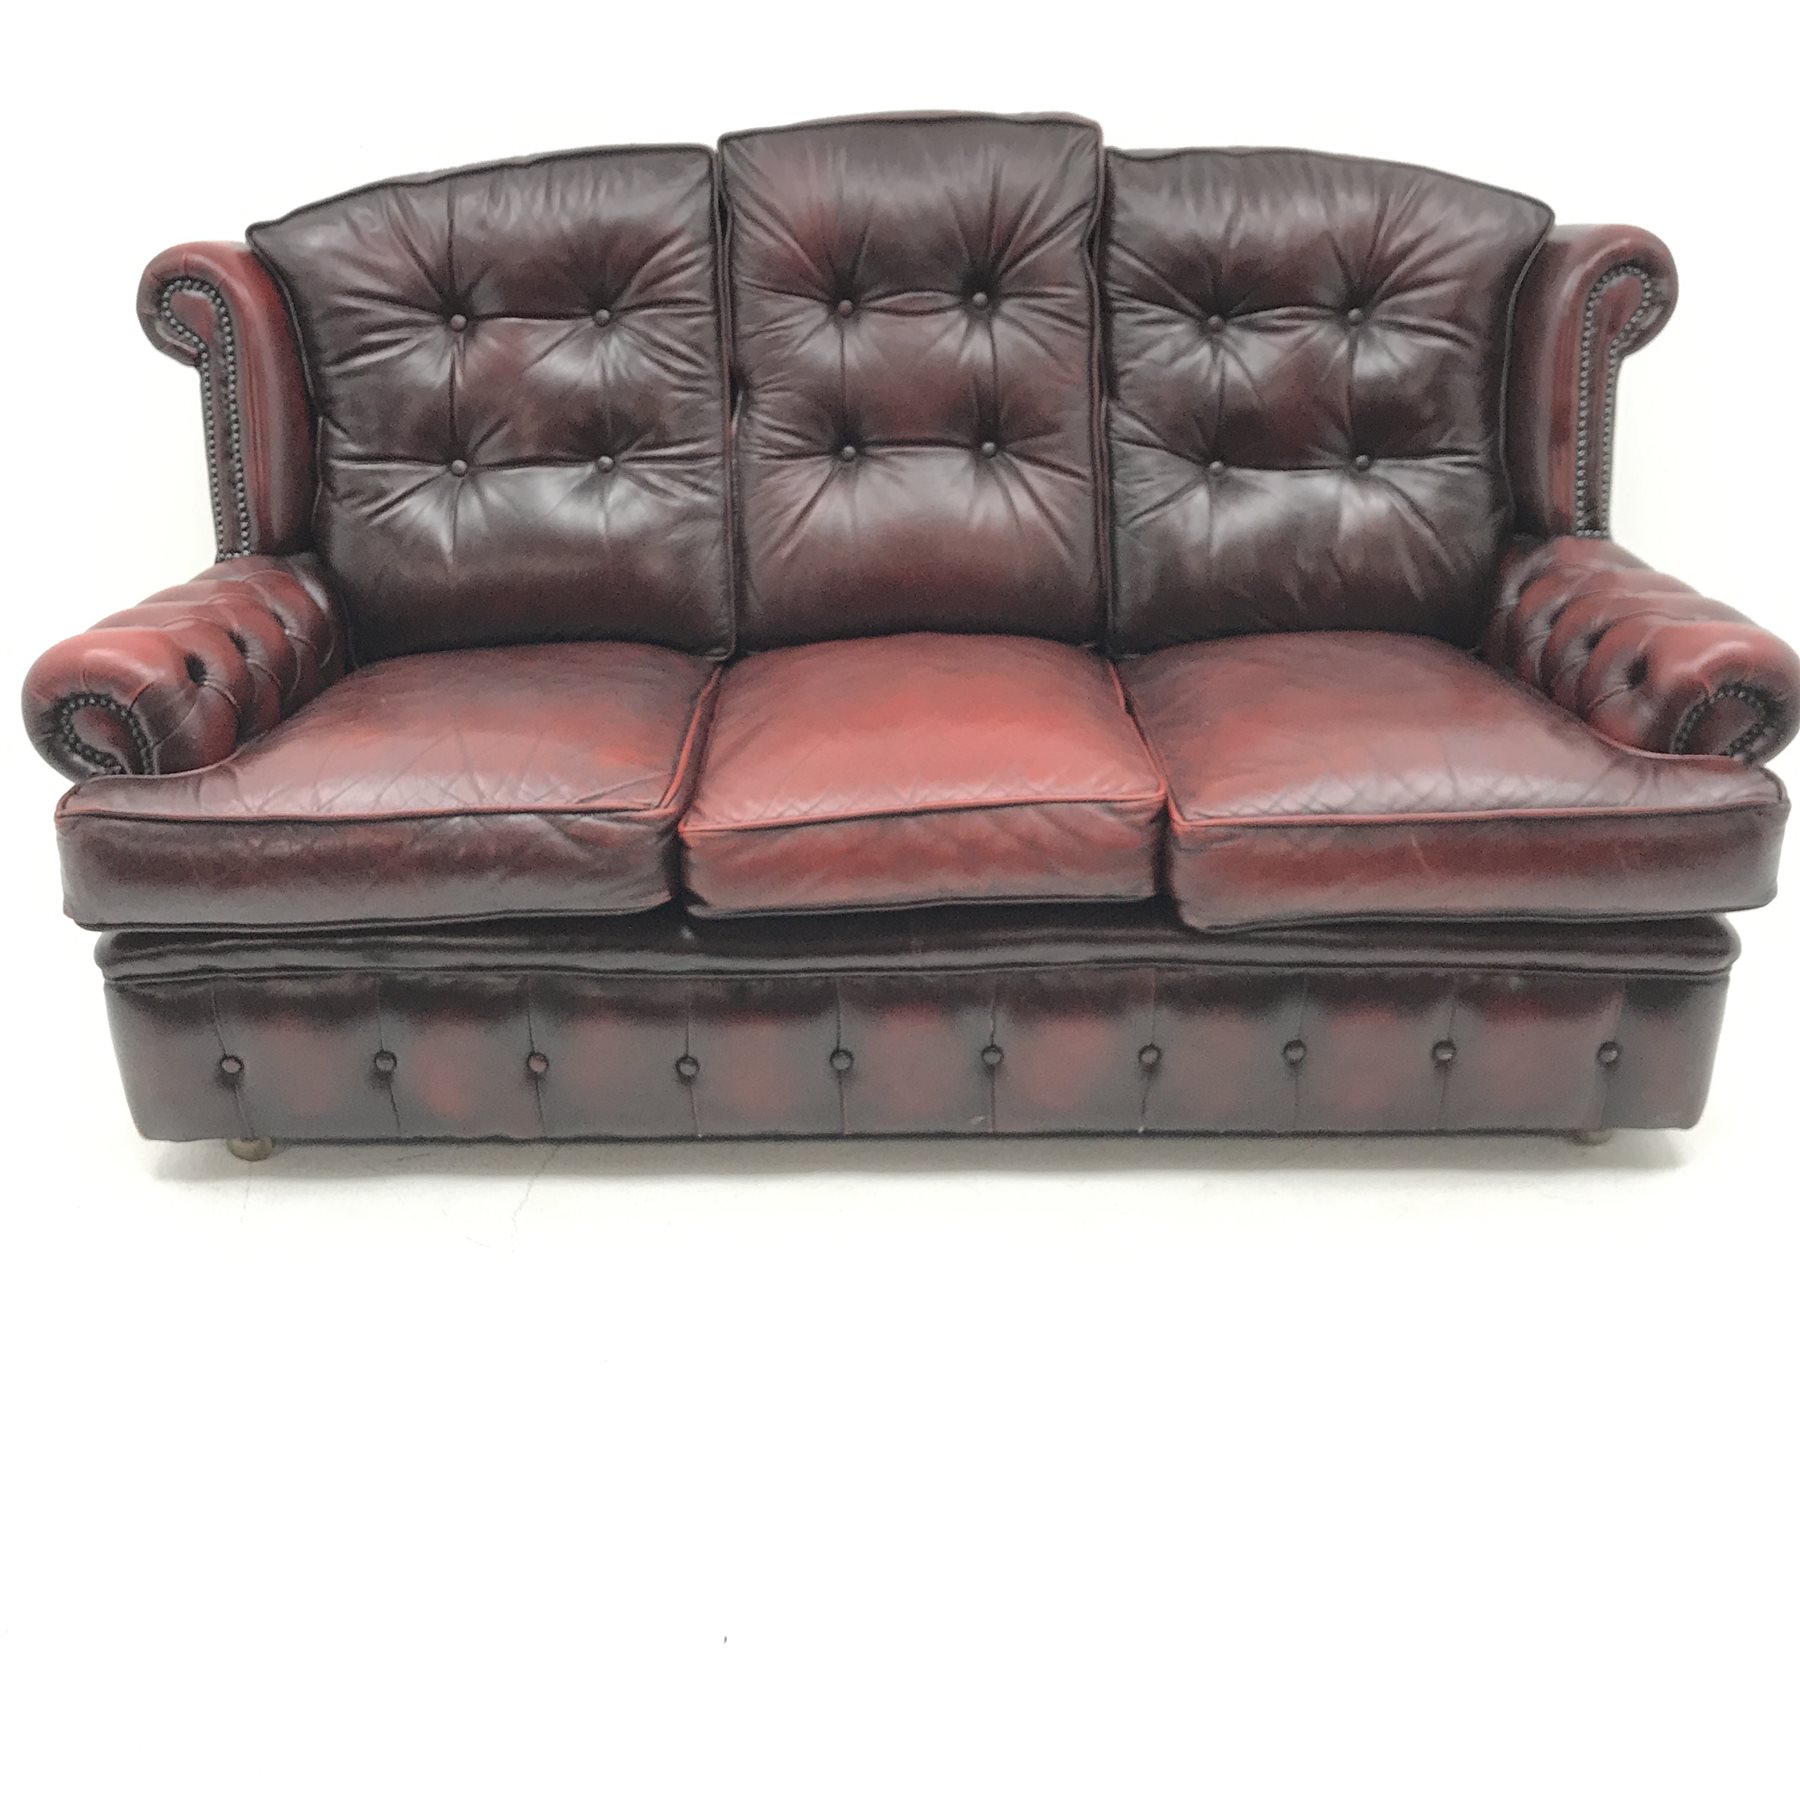 Georgian style three seat sofa upholstered in deep buttoned vintage red leather (W175cm) and pair of - Image 6 of 10